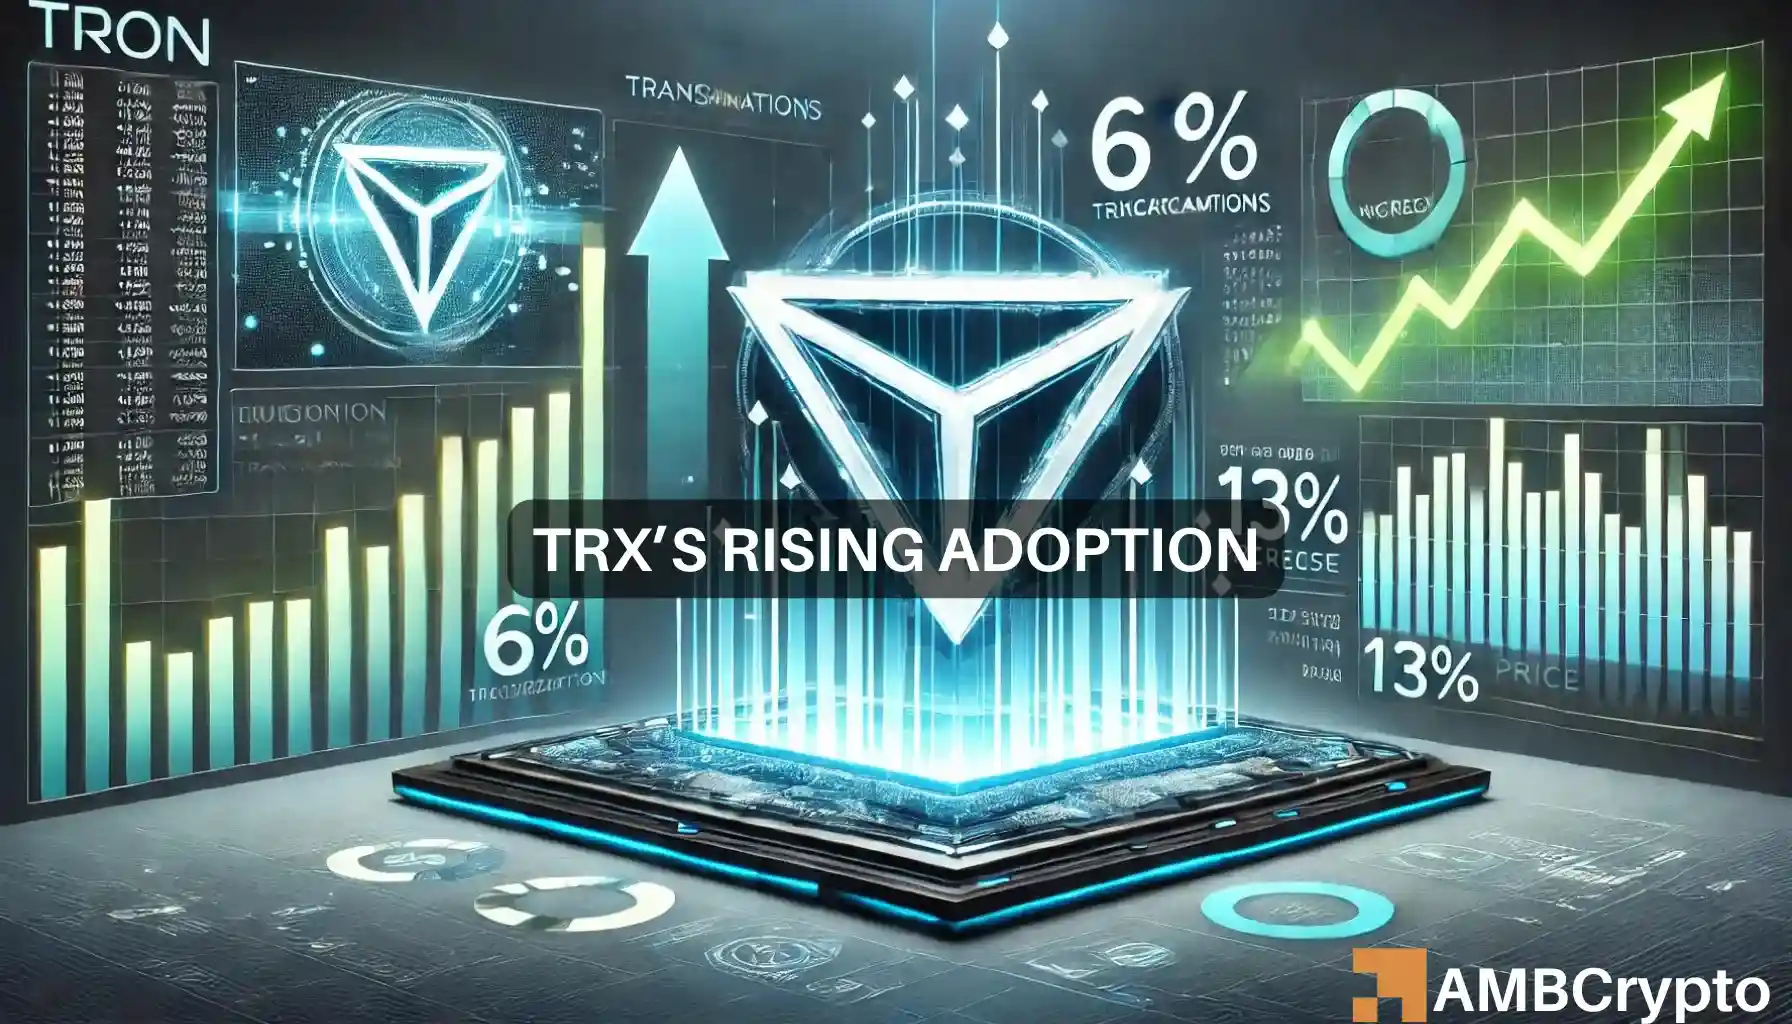 Tron’s monthly performance: 6% more transactions, 13% price increase